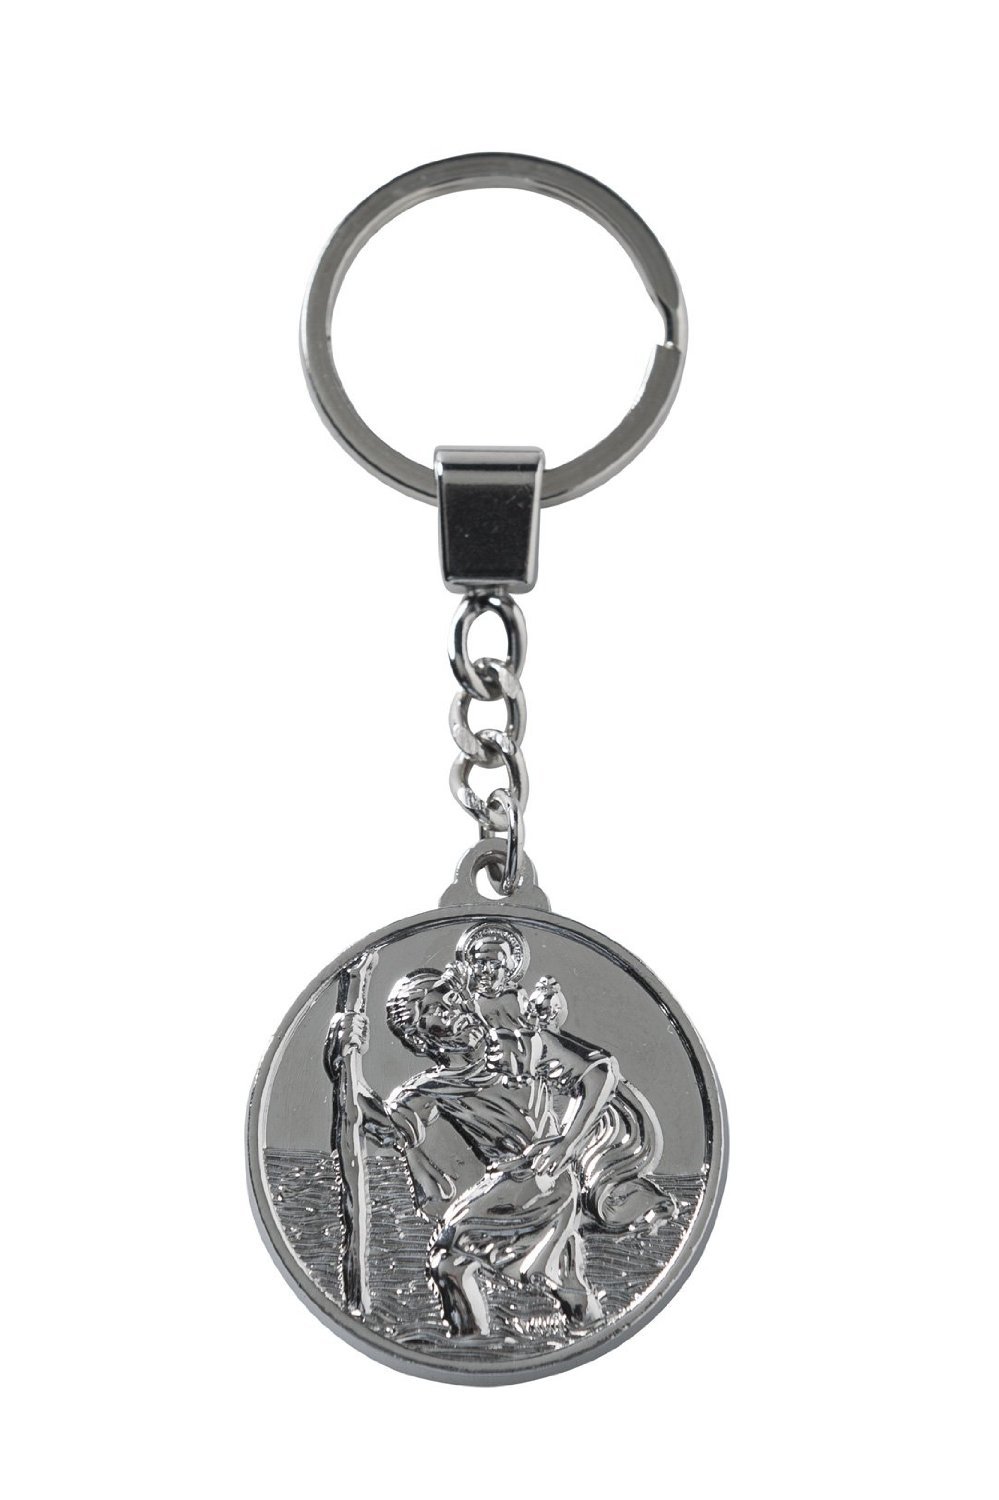 Sumex / Suministros Exteriores SA Christian Holy St Christopher Silver Circle Keychain Keyring Travel Car Charm von Sumex